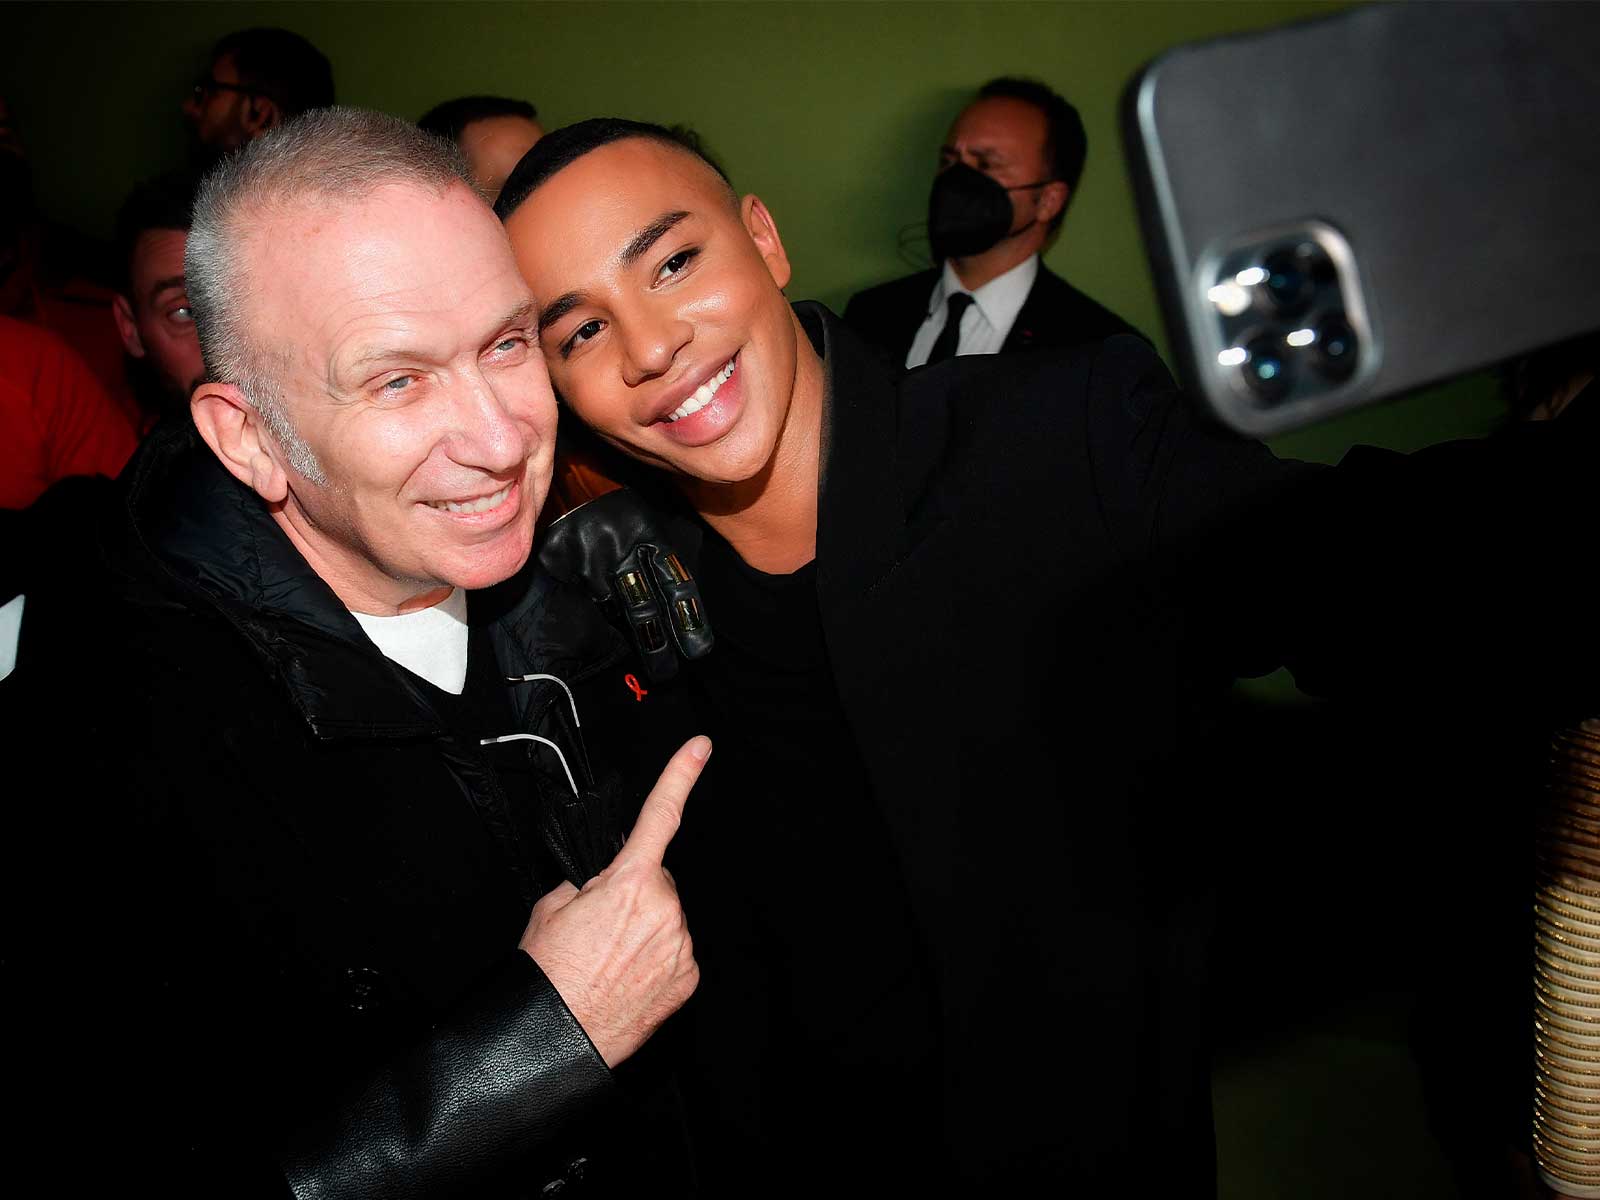 Olivier Rousteing to design Jean Paul Gaultier’s next collection